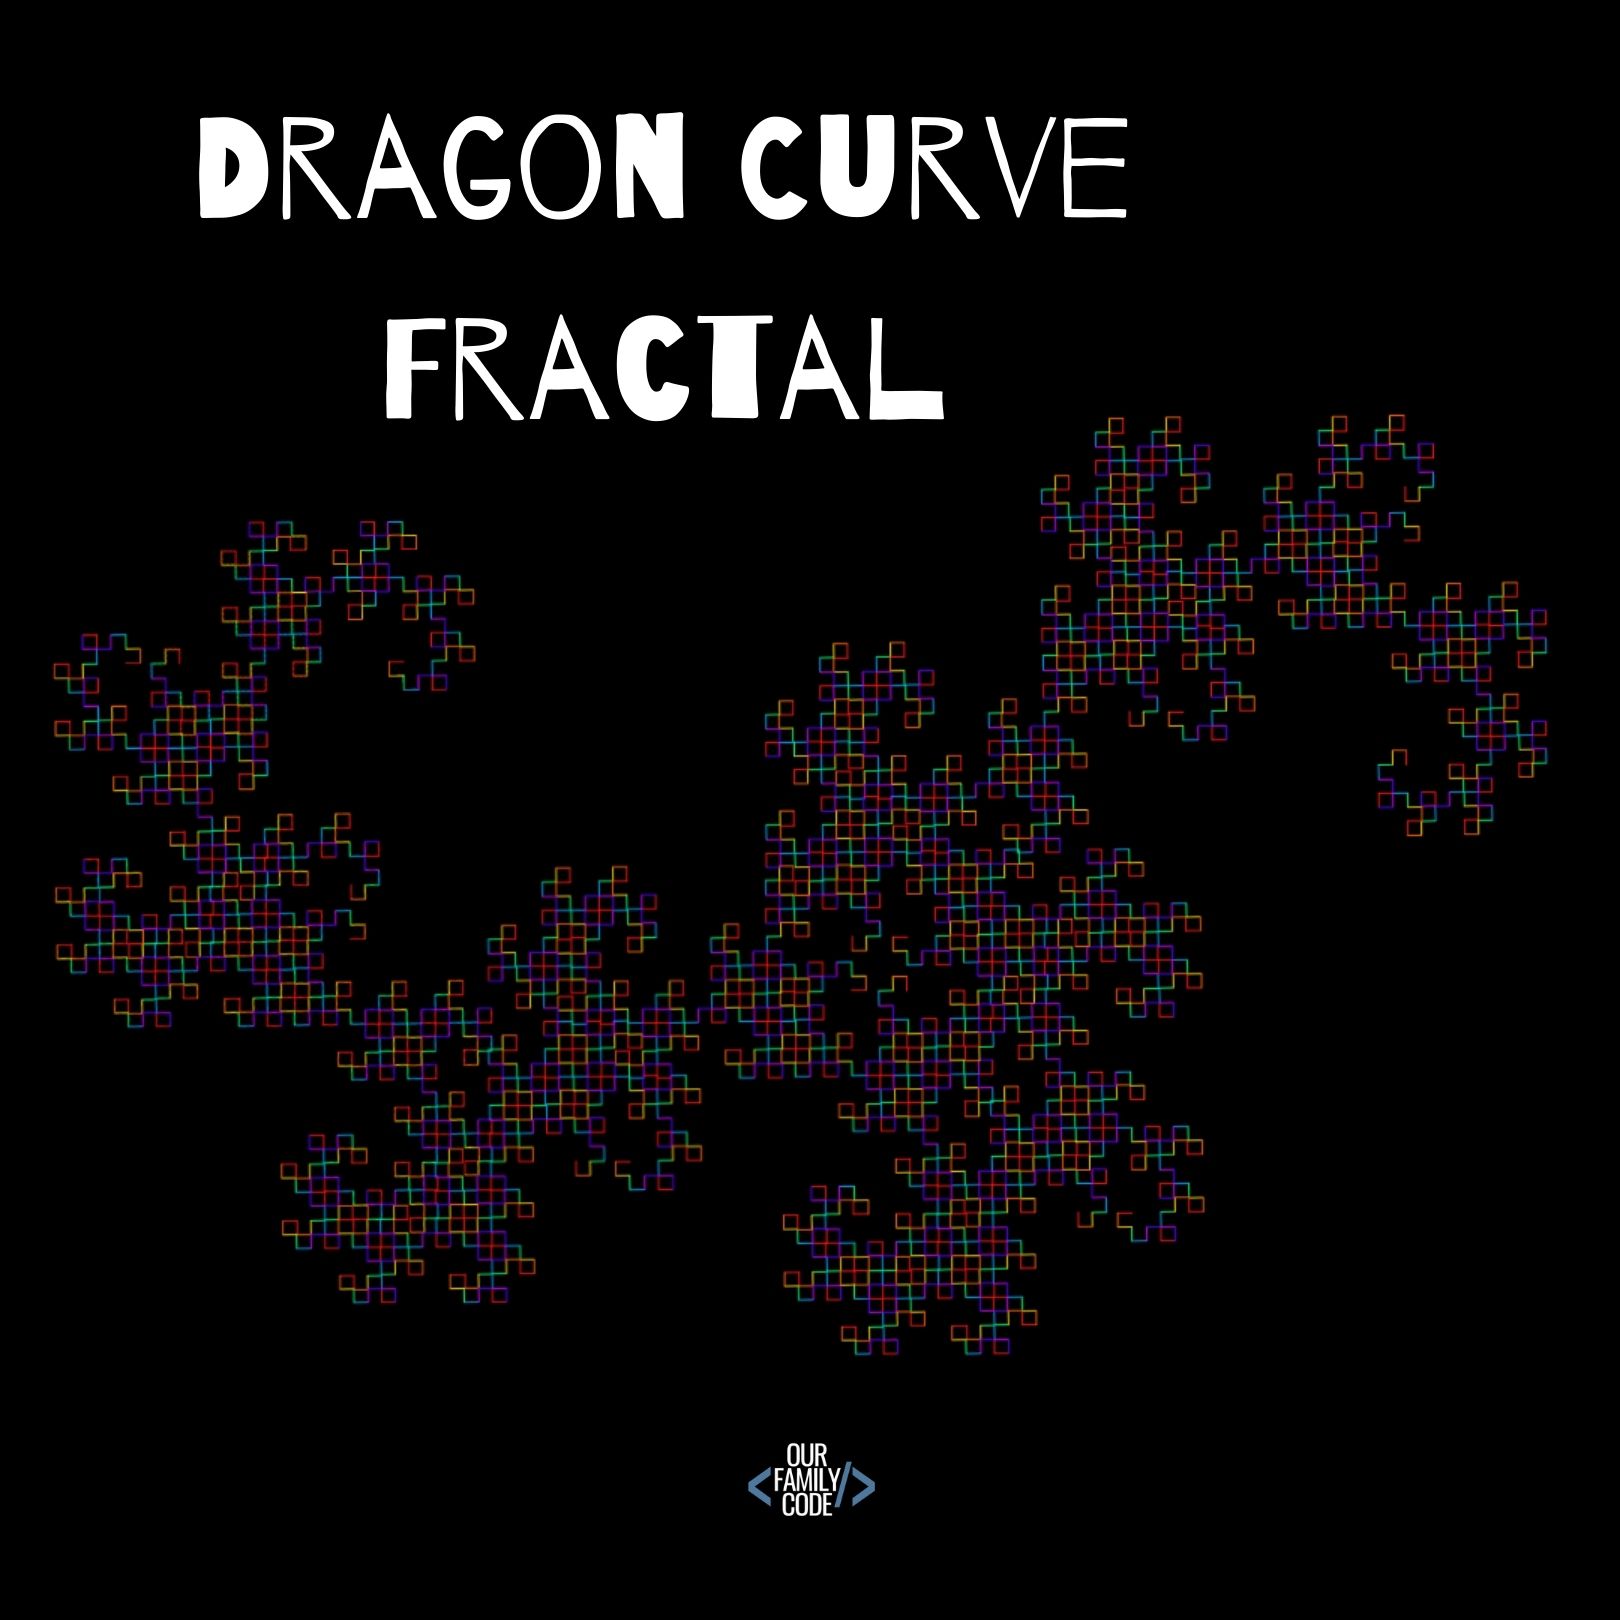 A picture of a Dragon Curve fractal with 12 iterations.